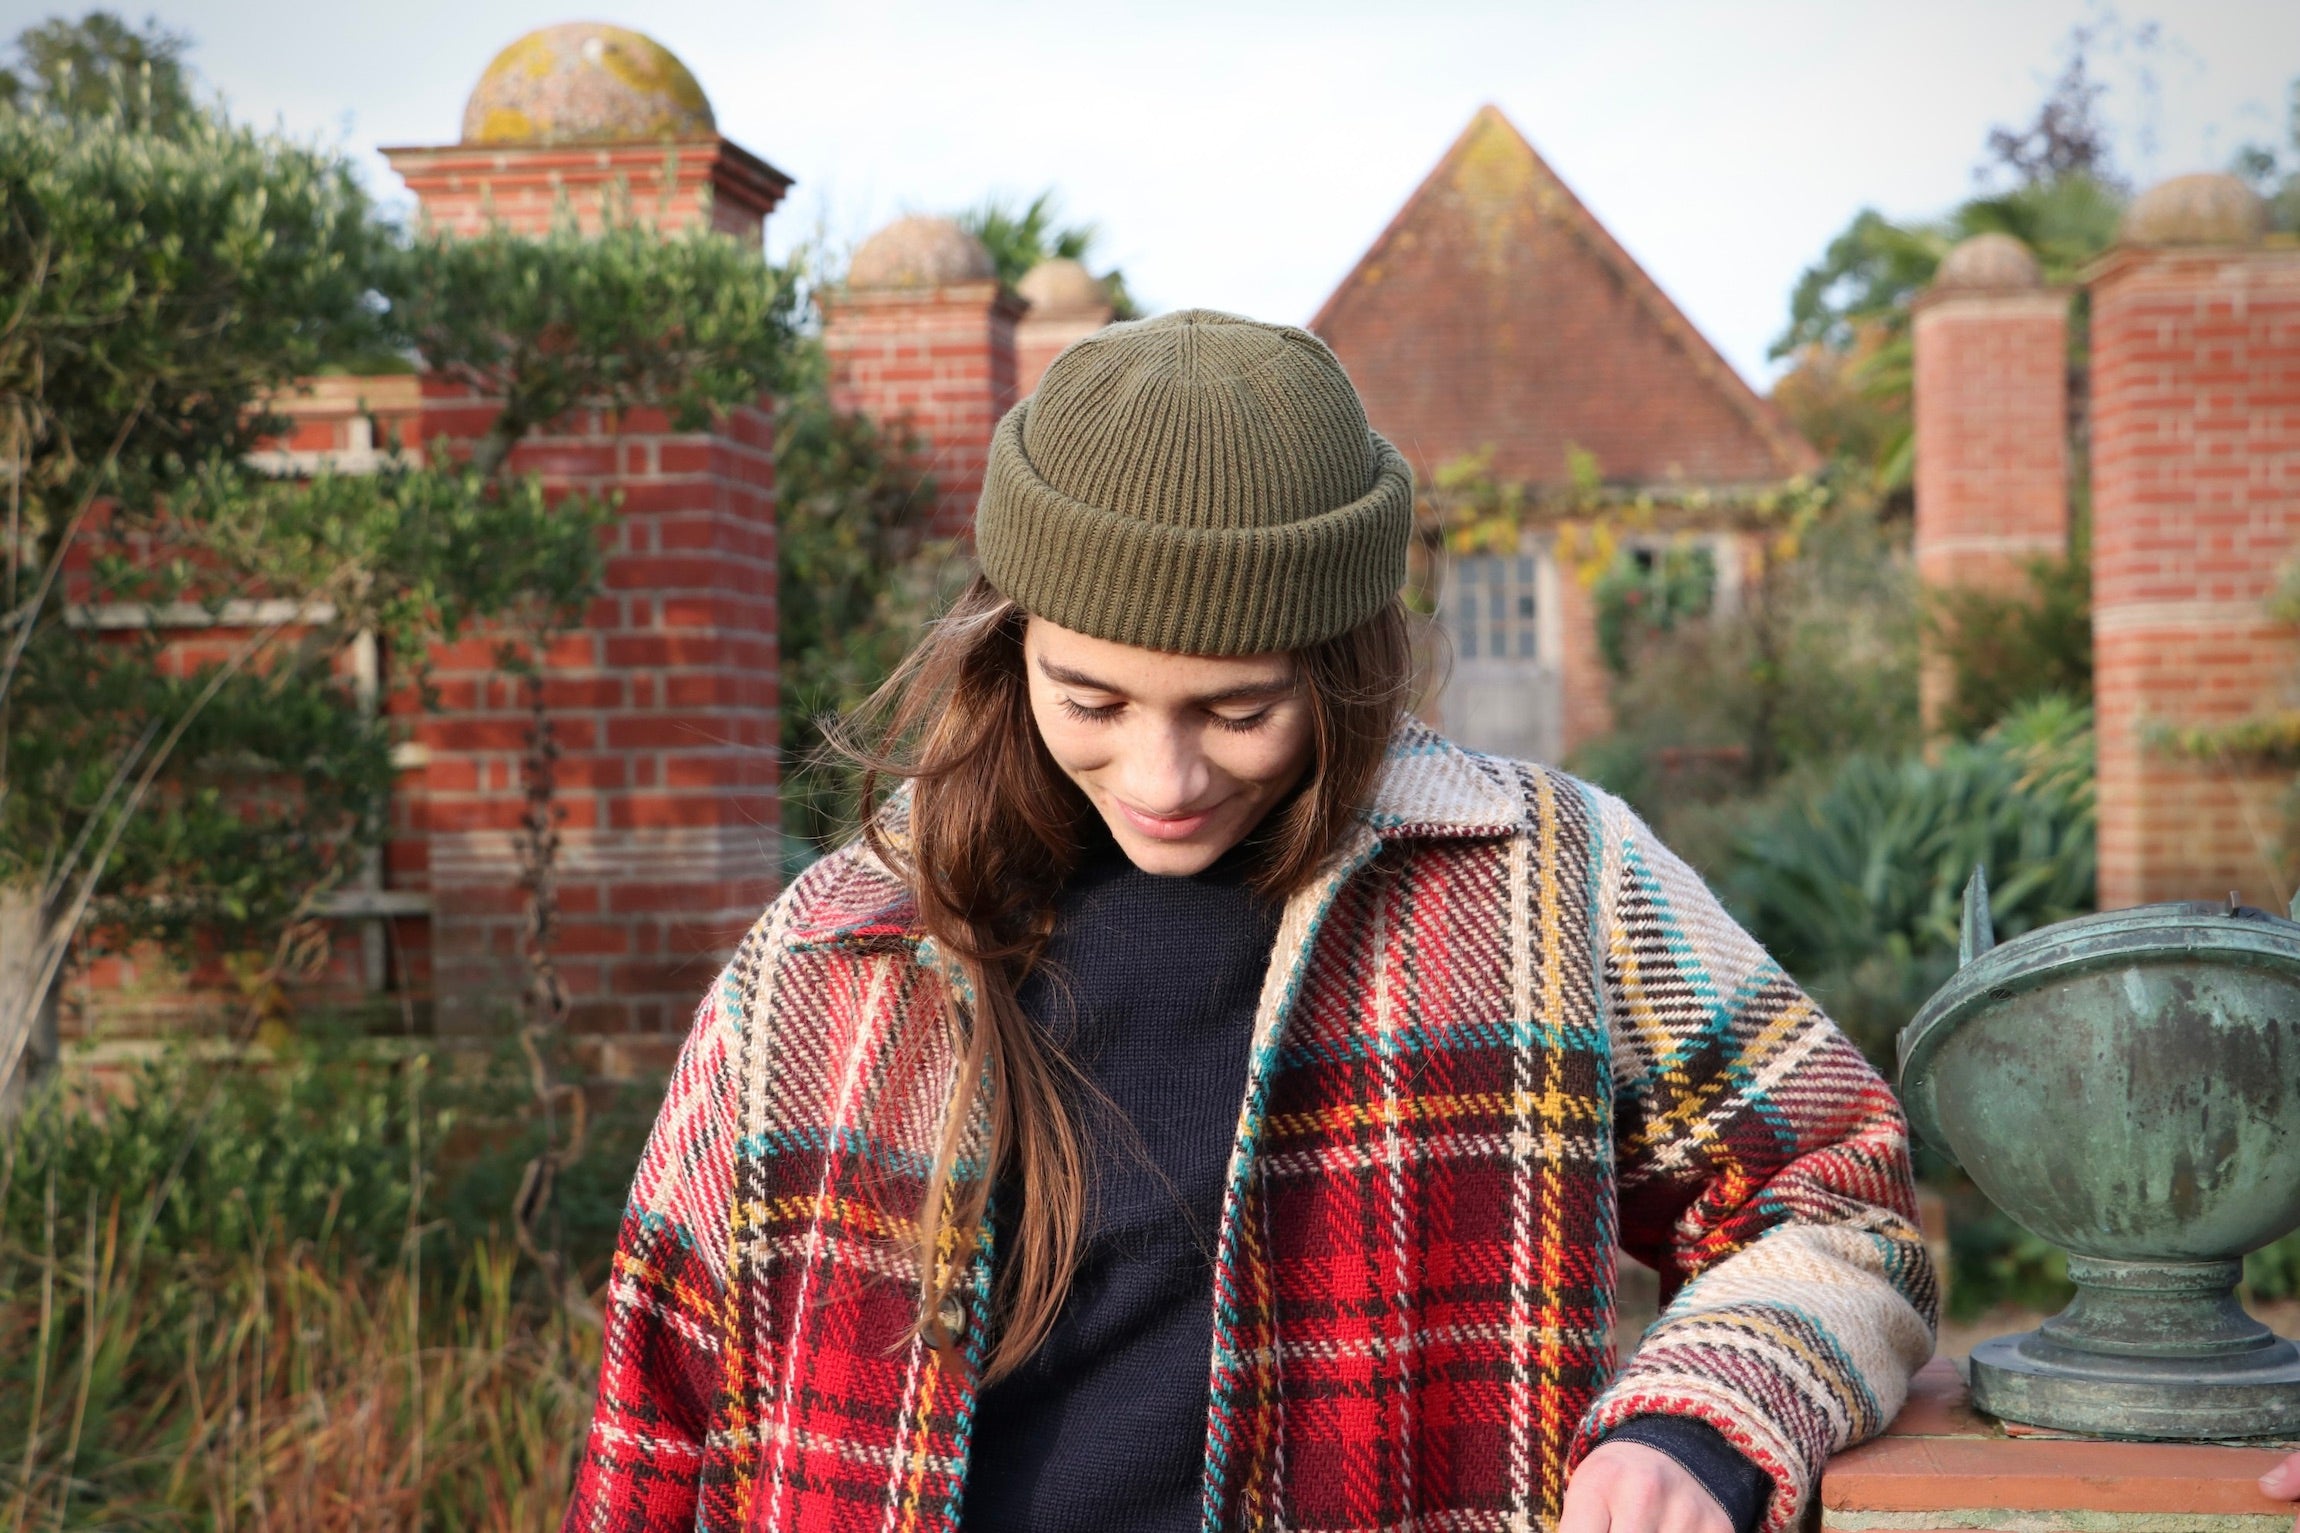 Decca wears Le Tricoteur Premium Guernsey in Navy with Wool Hat in Olive Drab and Celtic Wool Jacket